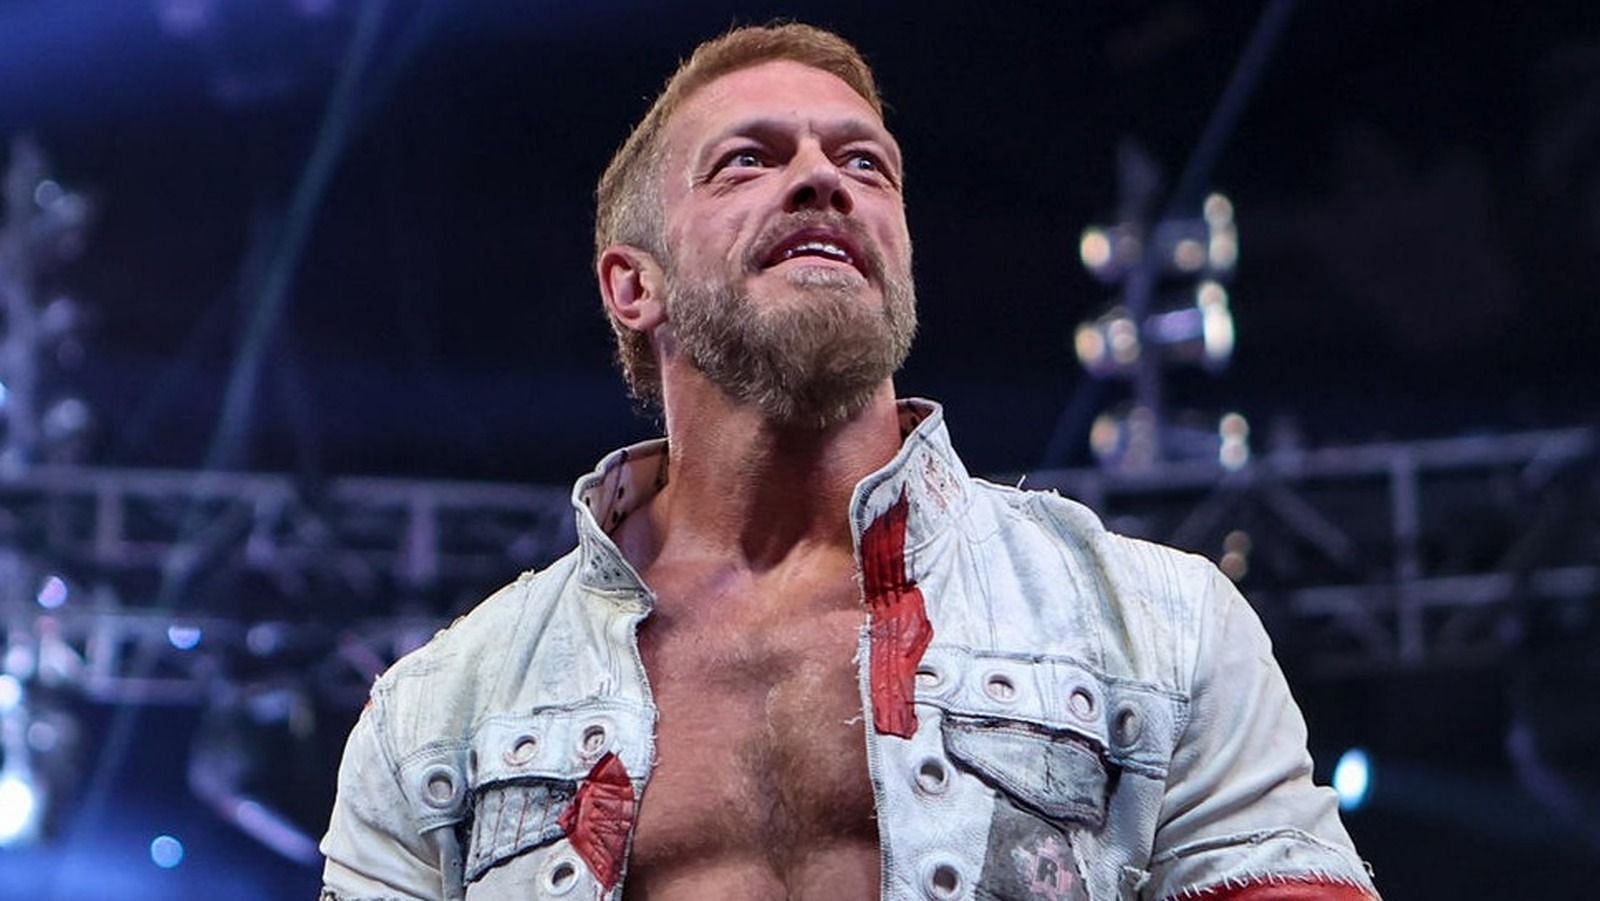 Edge is currently feuding with The Judgment Day in WWE